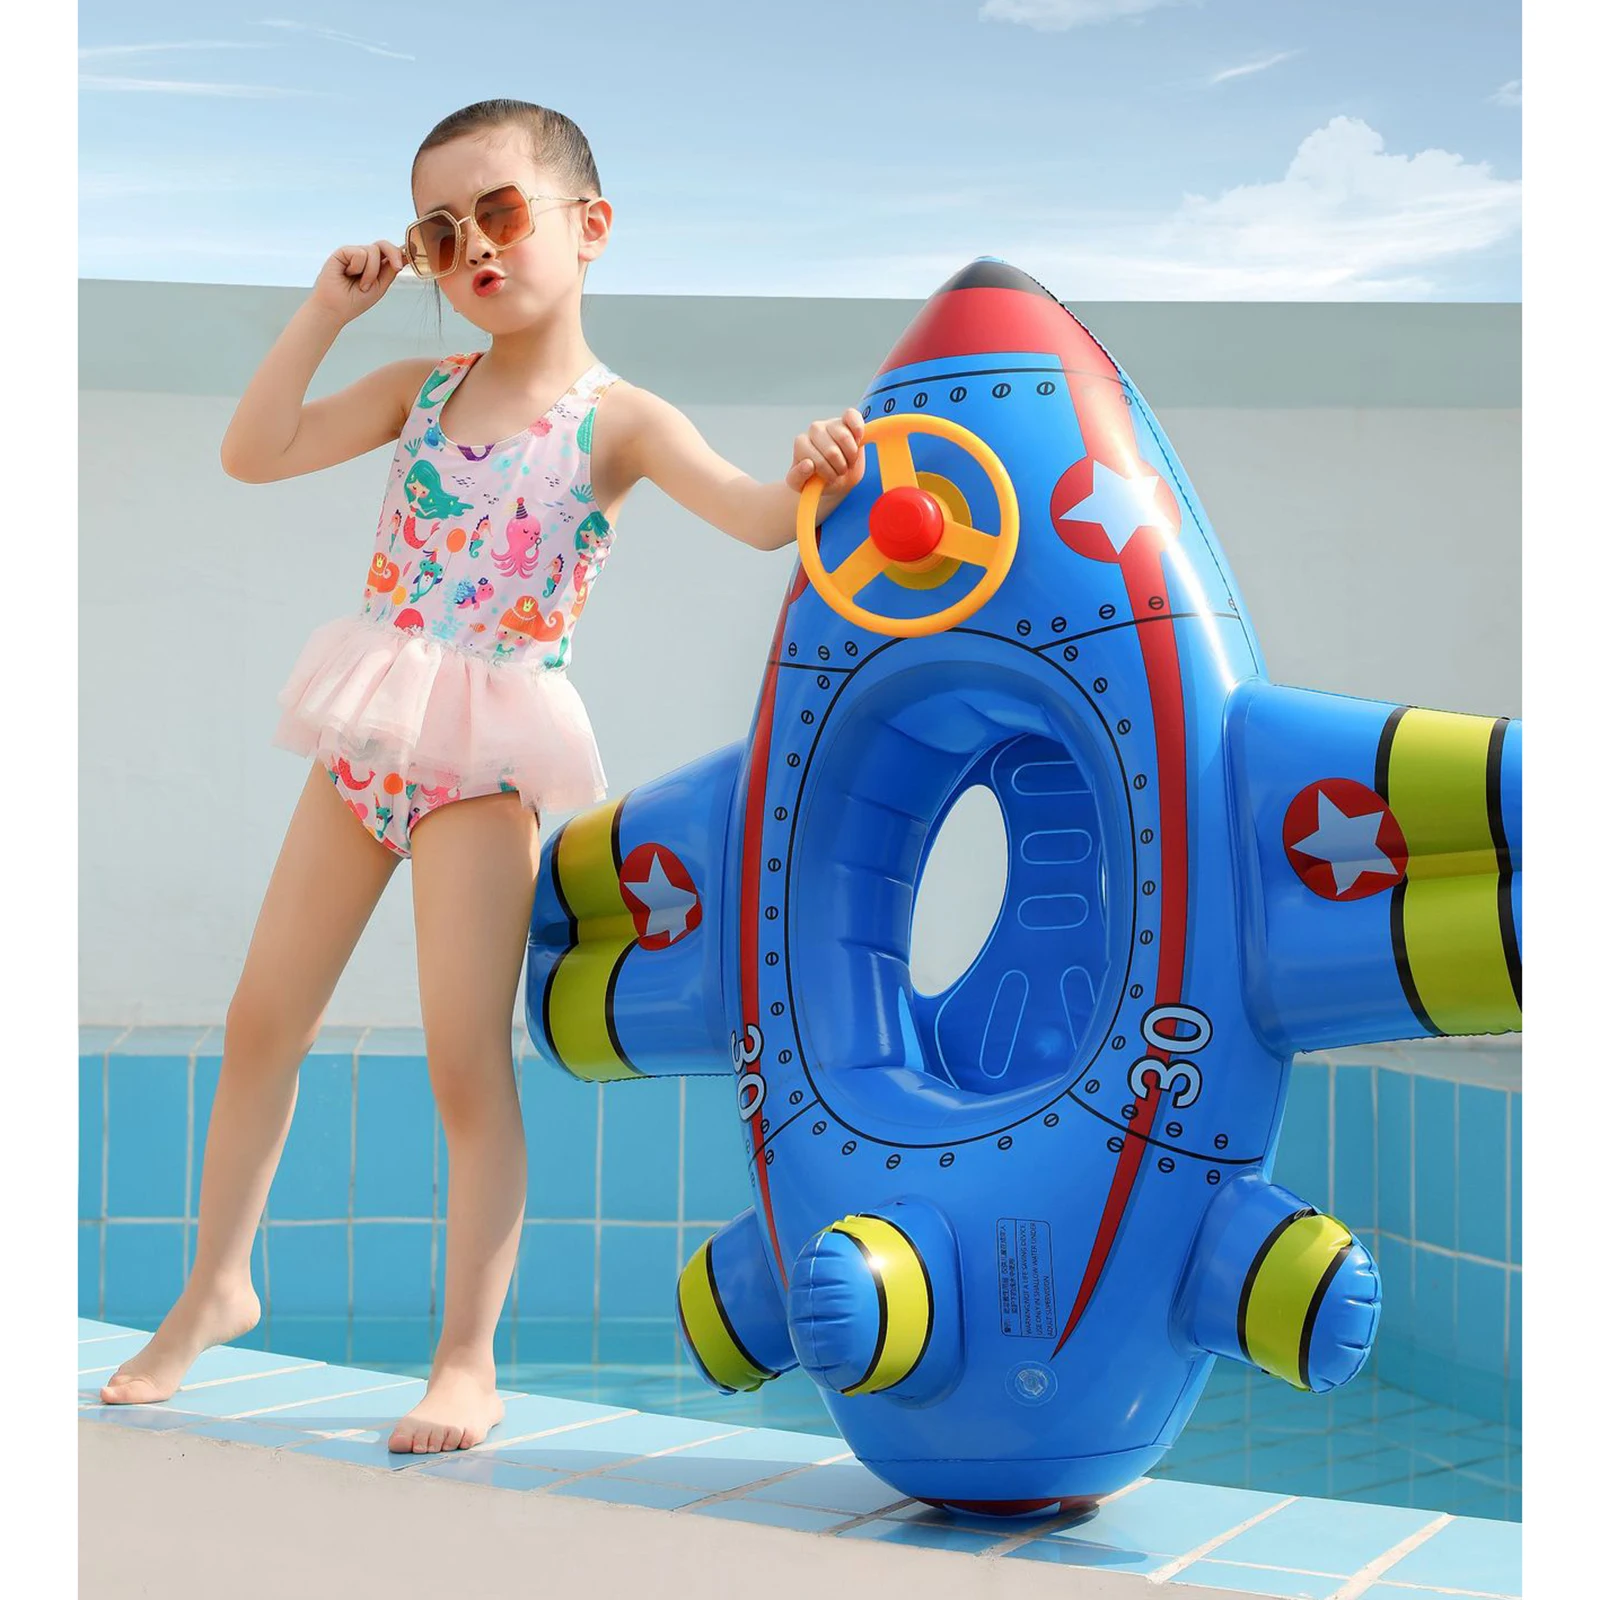 Aircraft Shape Inflatable Toddler Baby Swim Float Kid Swimming Pool Seat w/ Steering Wheel